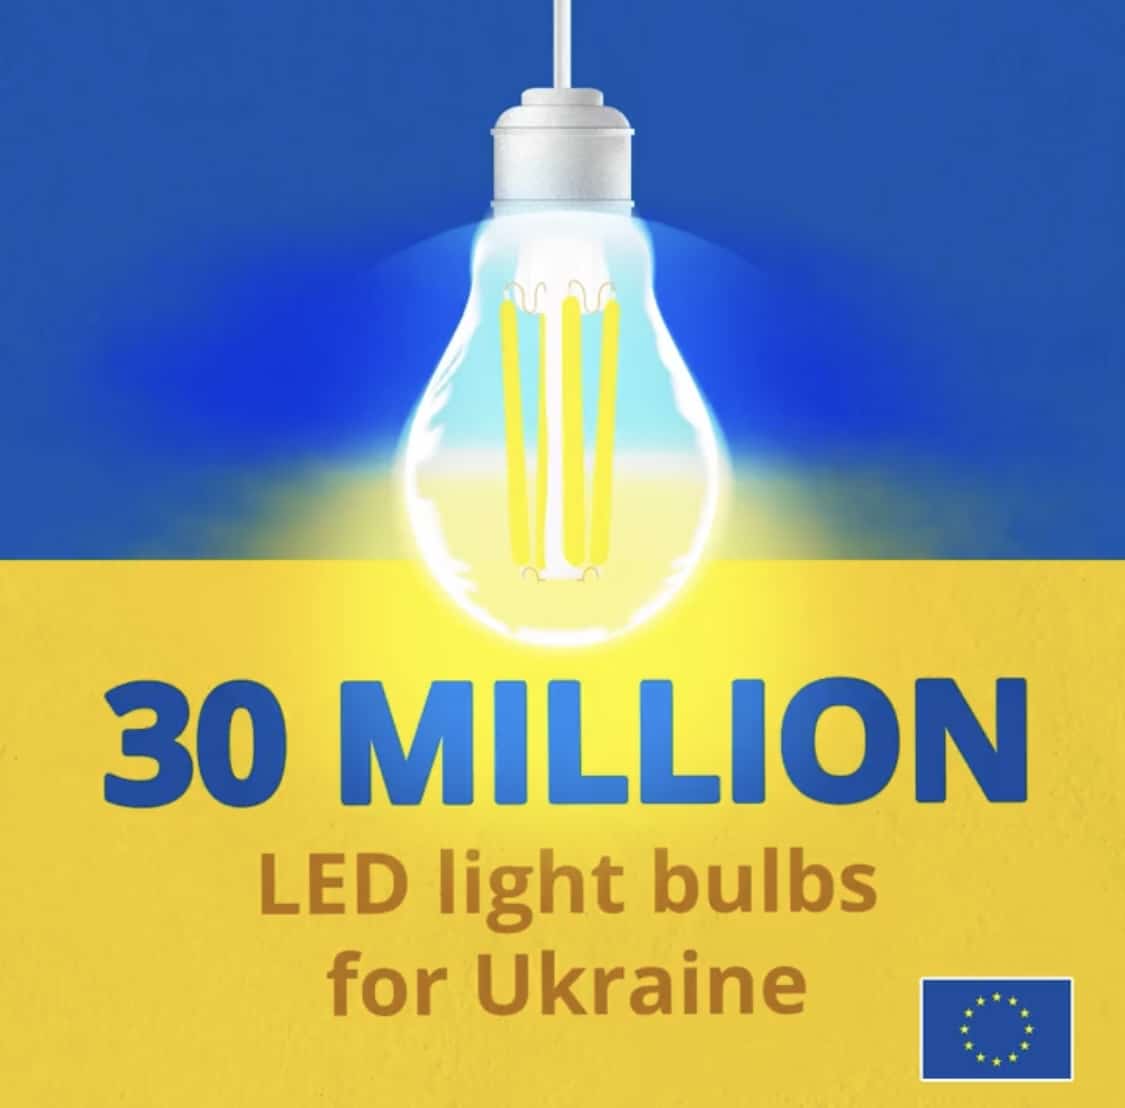 EU will fund 30 million LED bulbs for Ukraine, this will cover the part of deficit of energy system